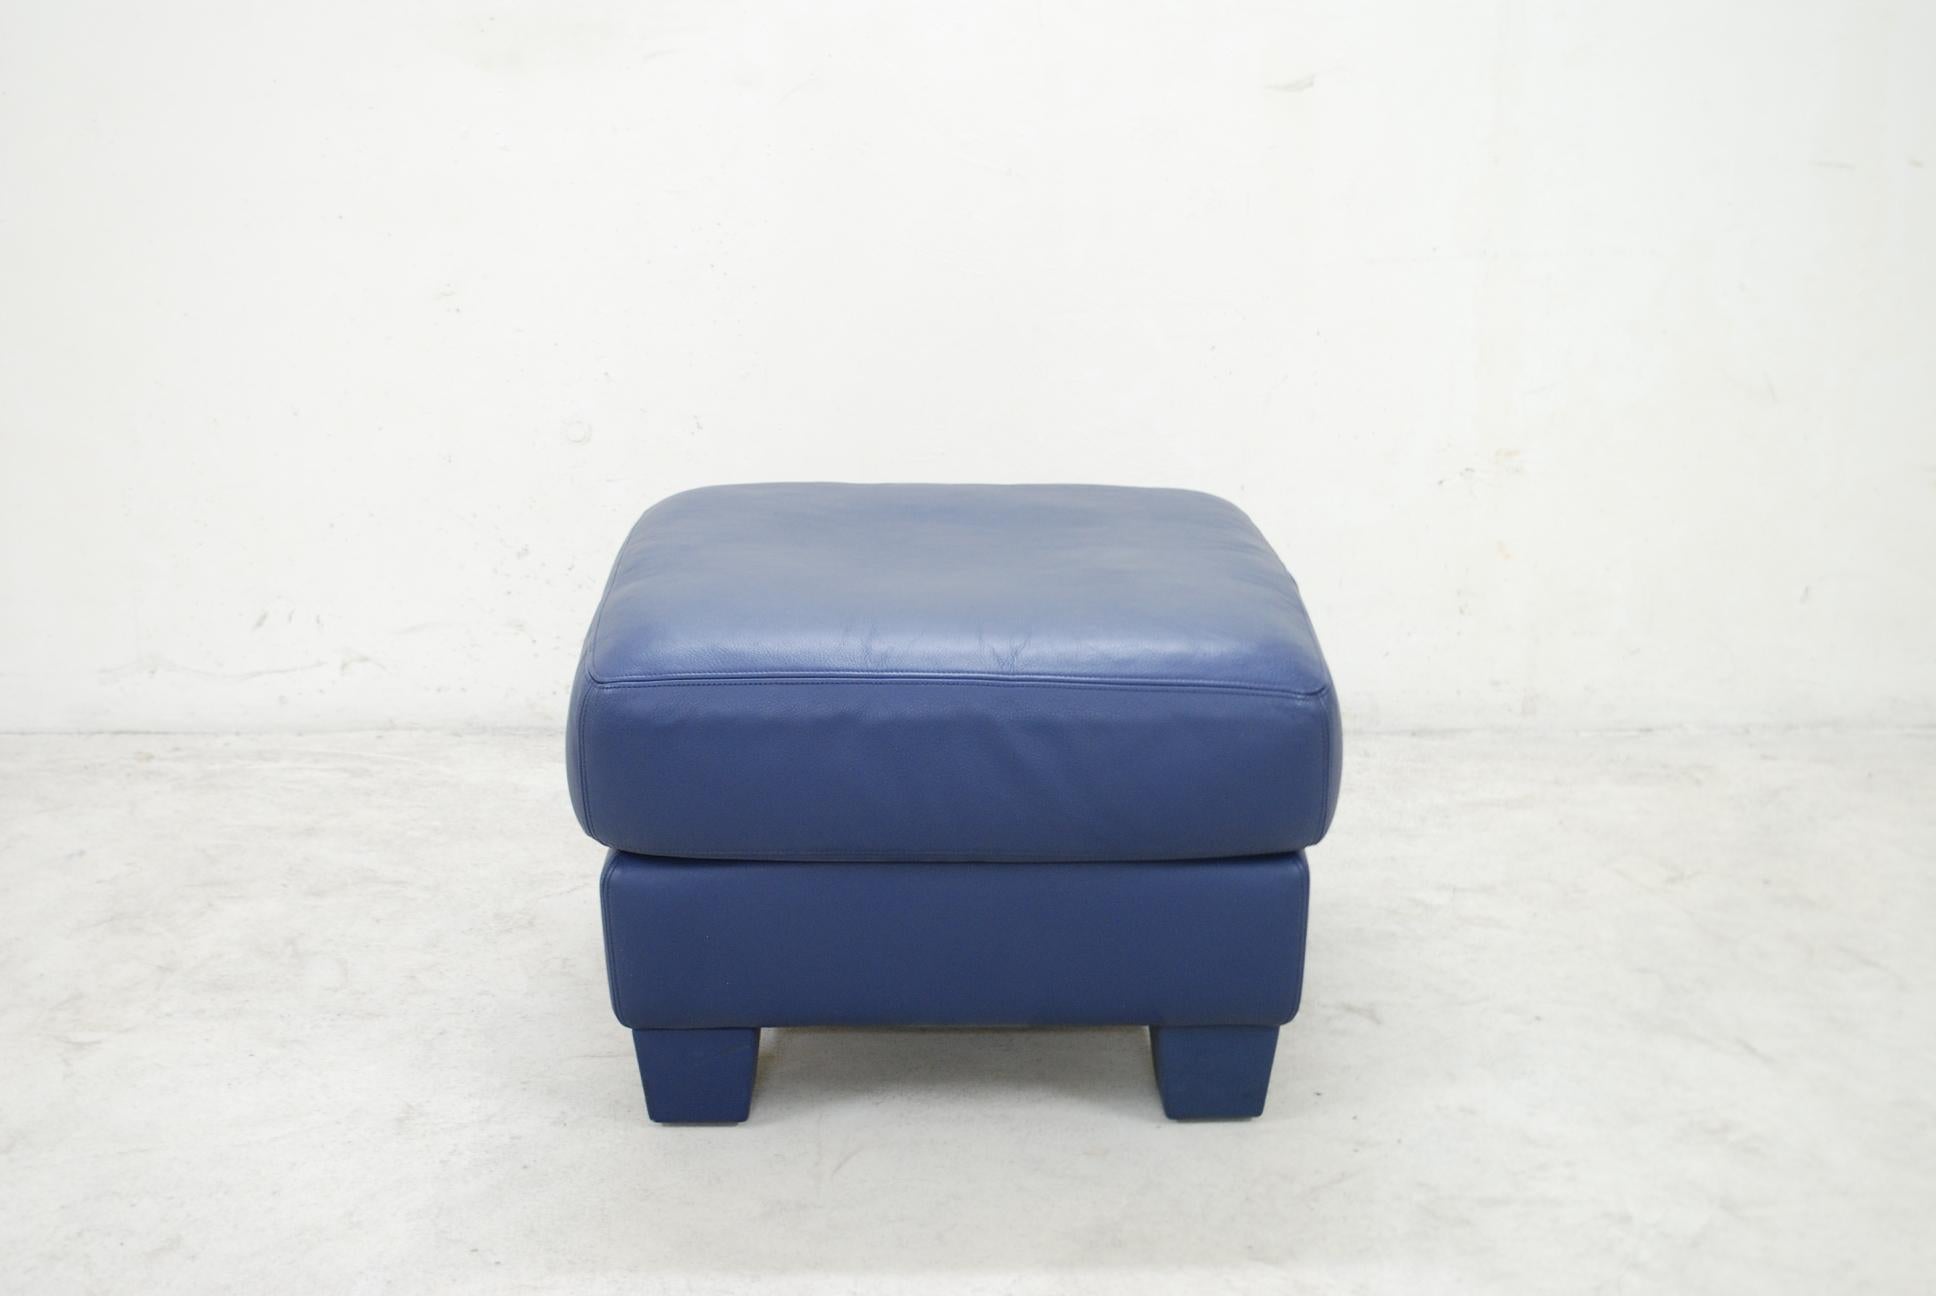 De Sede leather ottoman model DS 17.
The leather is the DS living semi aniline leather in blue color.
Great comfort and a Classic timeless design by De Sede.
In a very good condition.
 

  